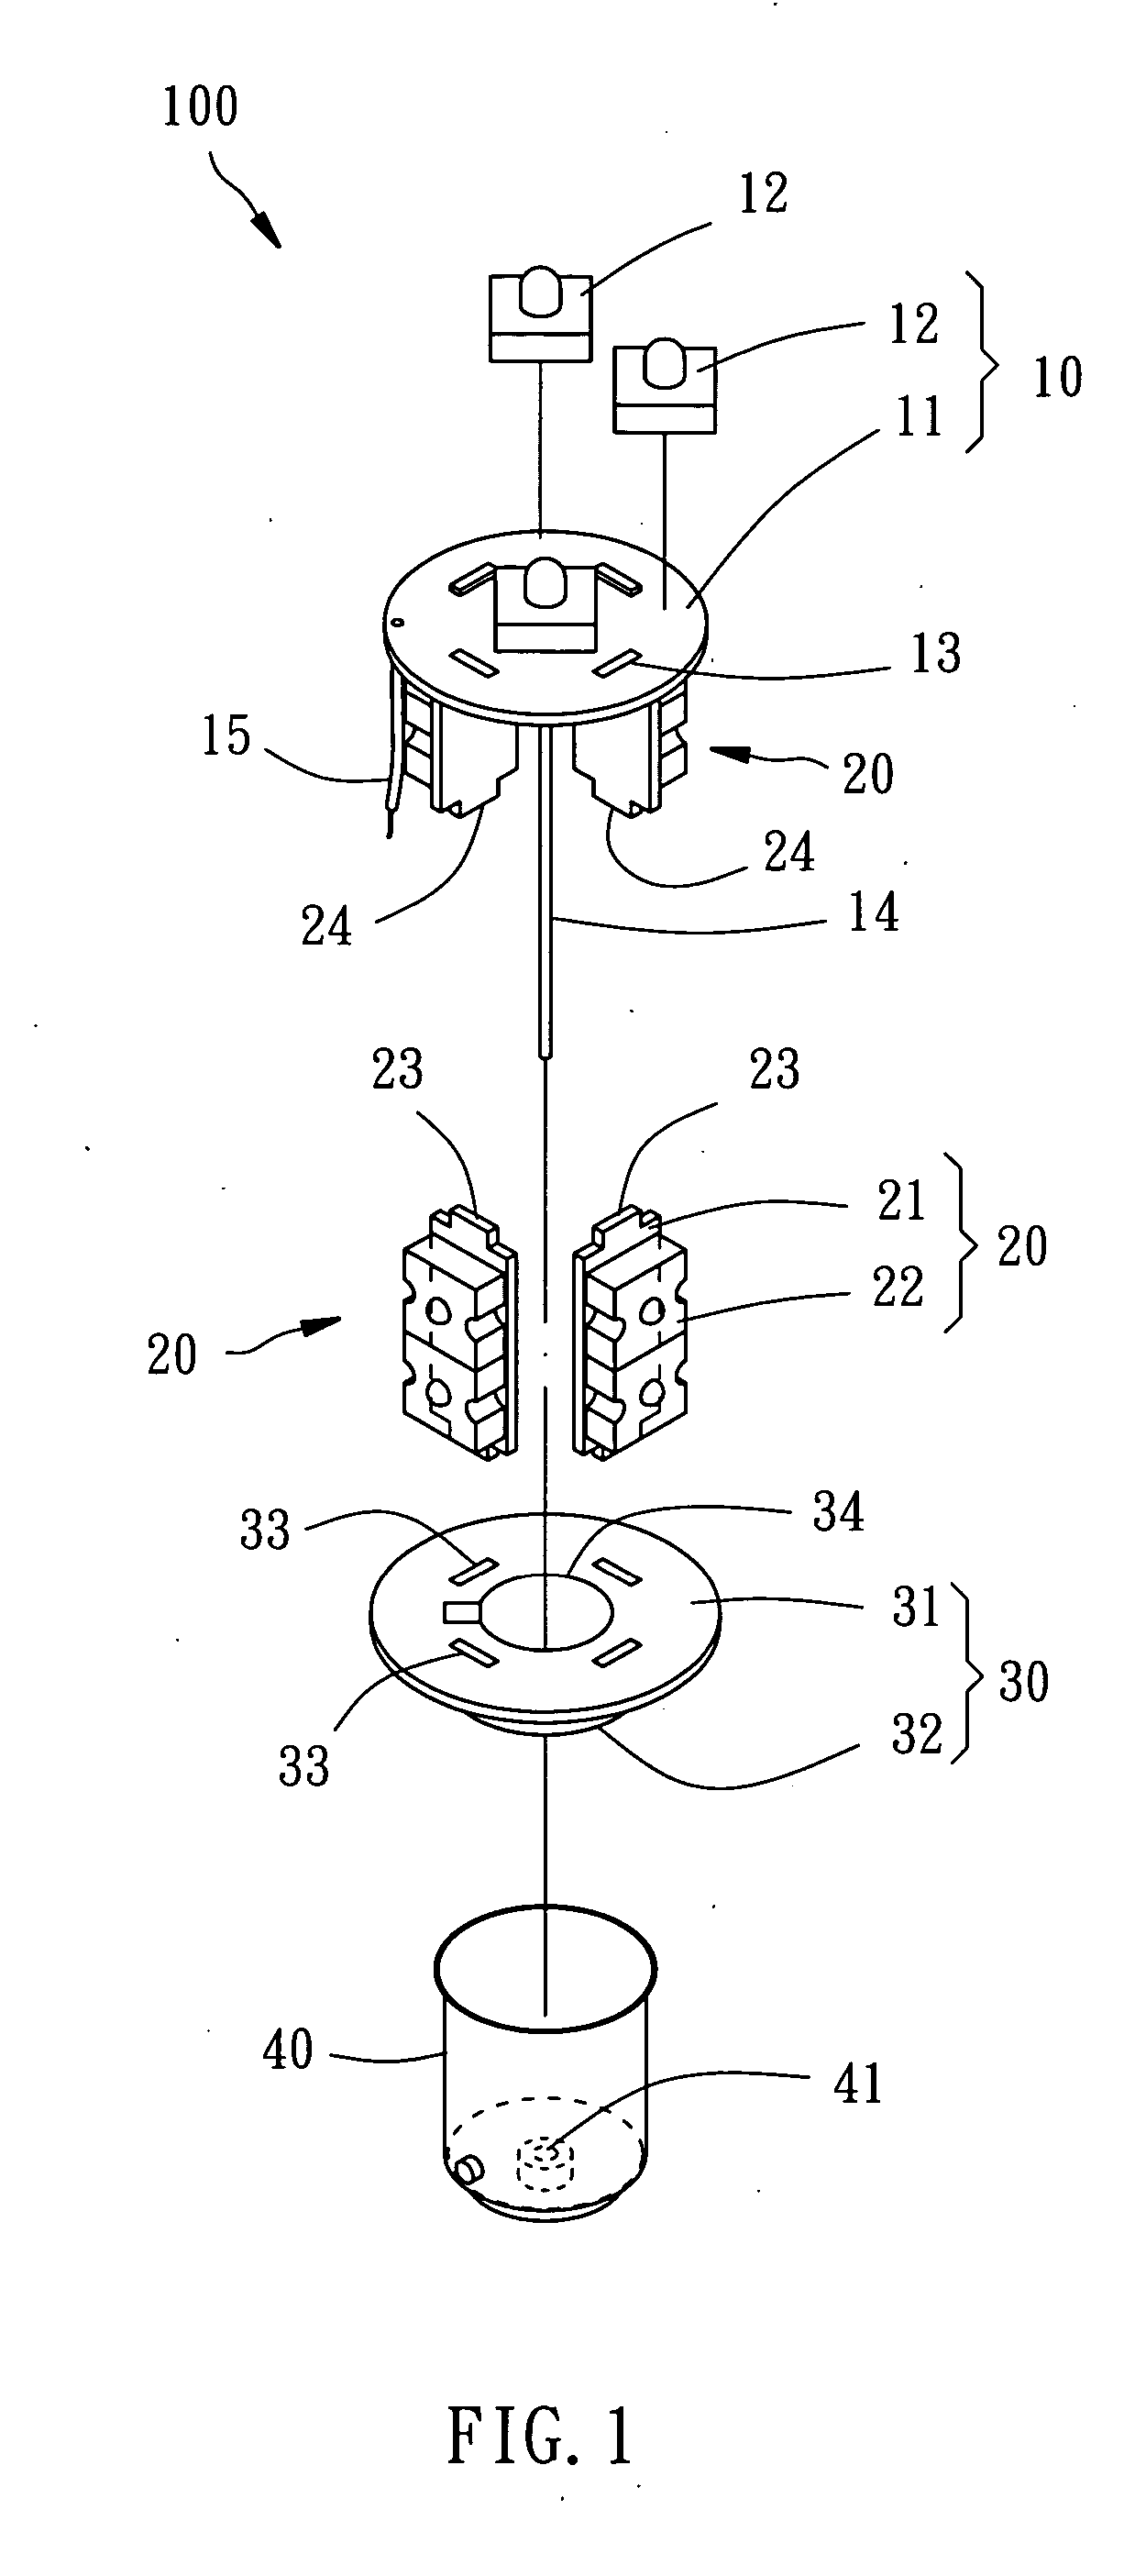 Bulb with light emitting diodes